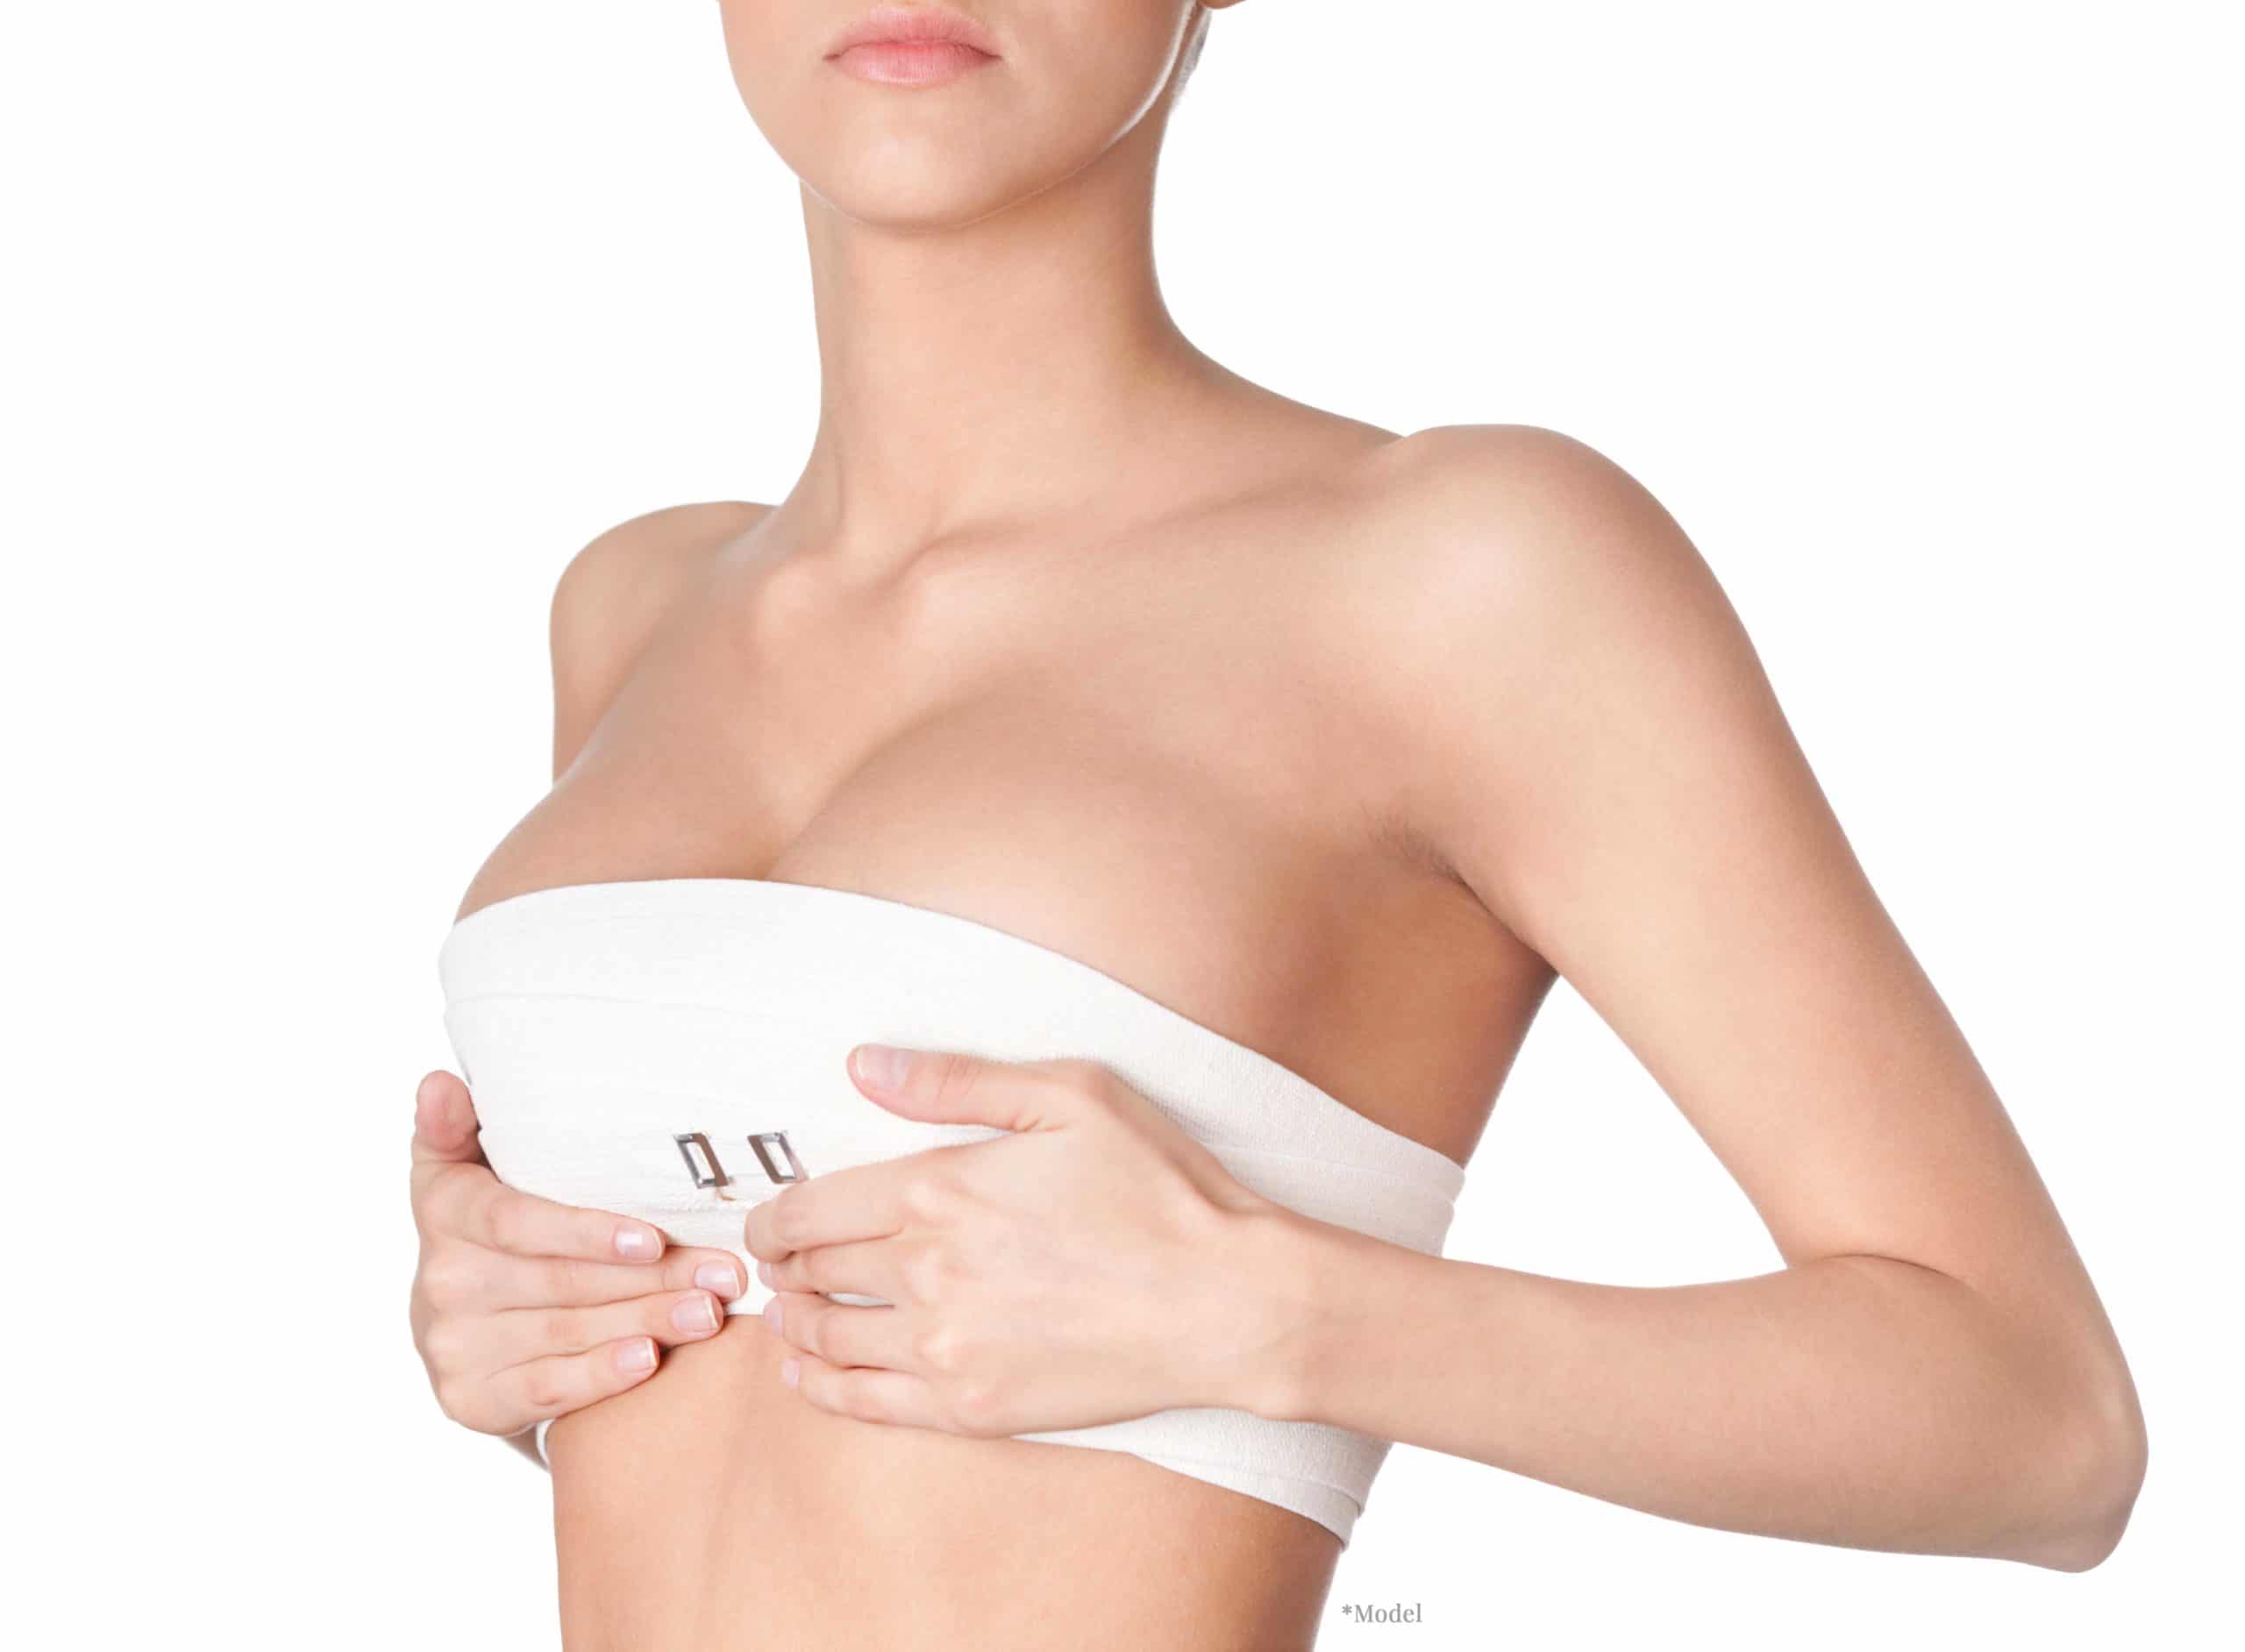 White female holding up her breasts wearing a compressions garment